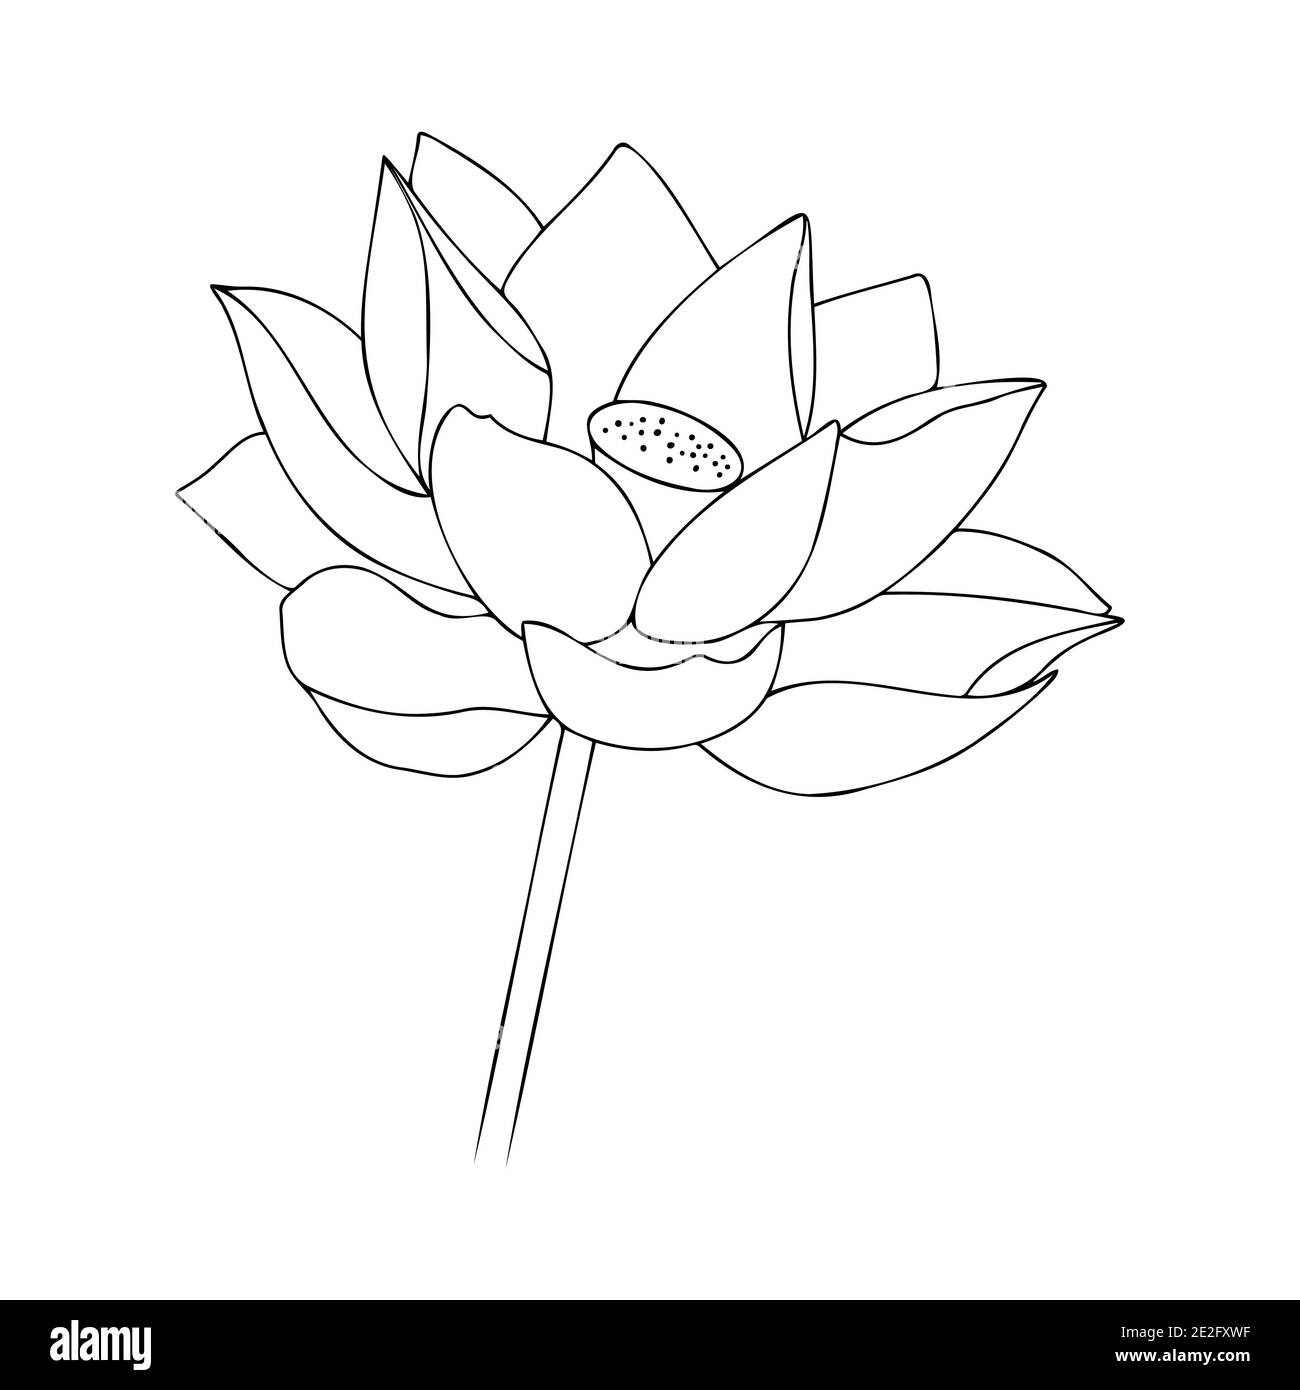 Water lily asian flower. Blossom flower illustration. Vector floral illustration. Black silhouette of lotus flowers icon on a white background. Vector illustration Stock Vector